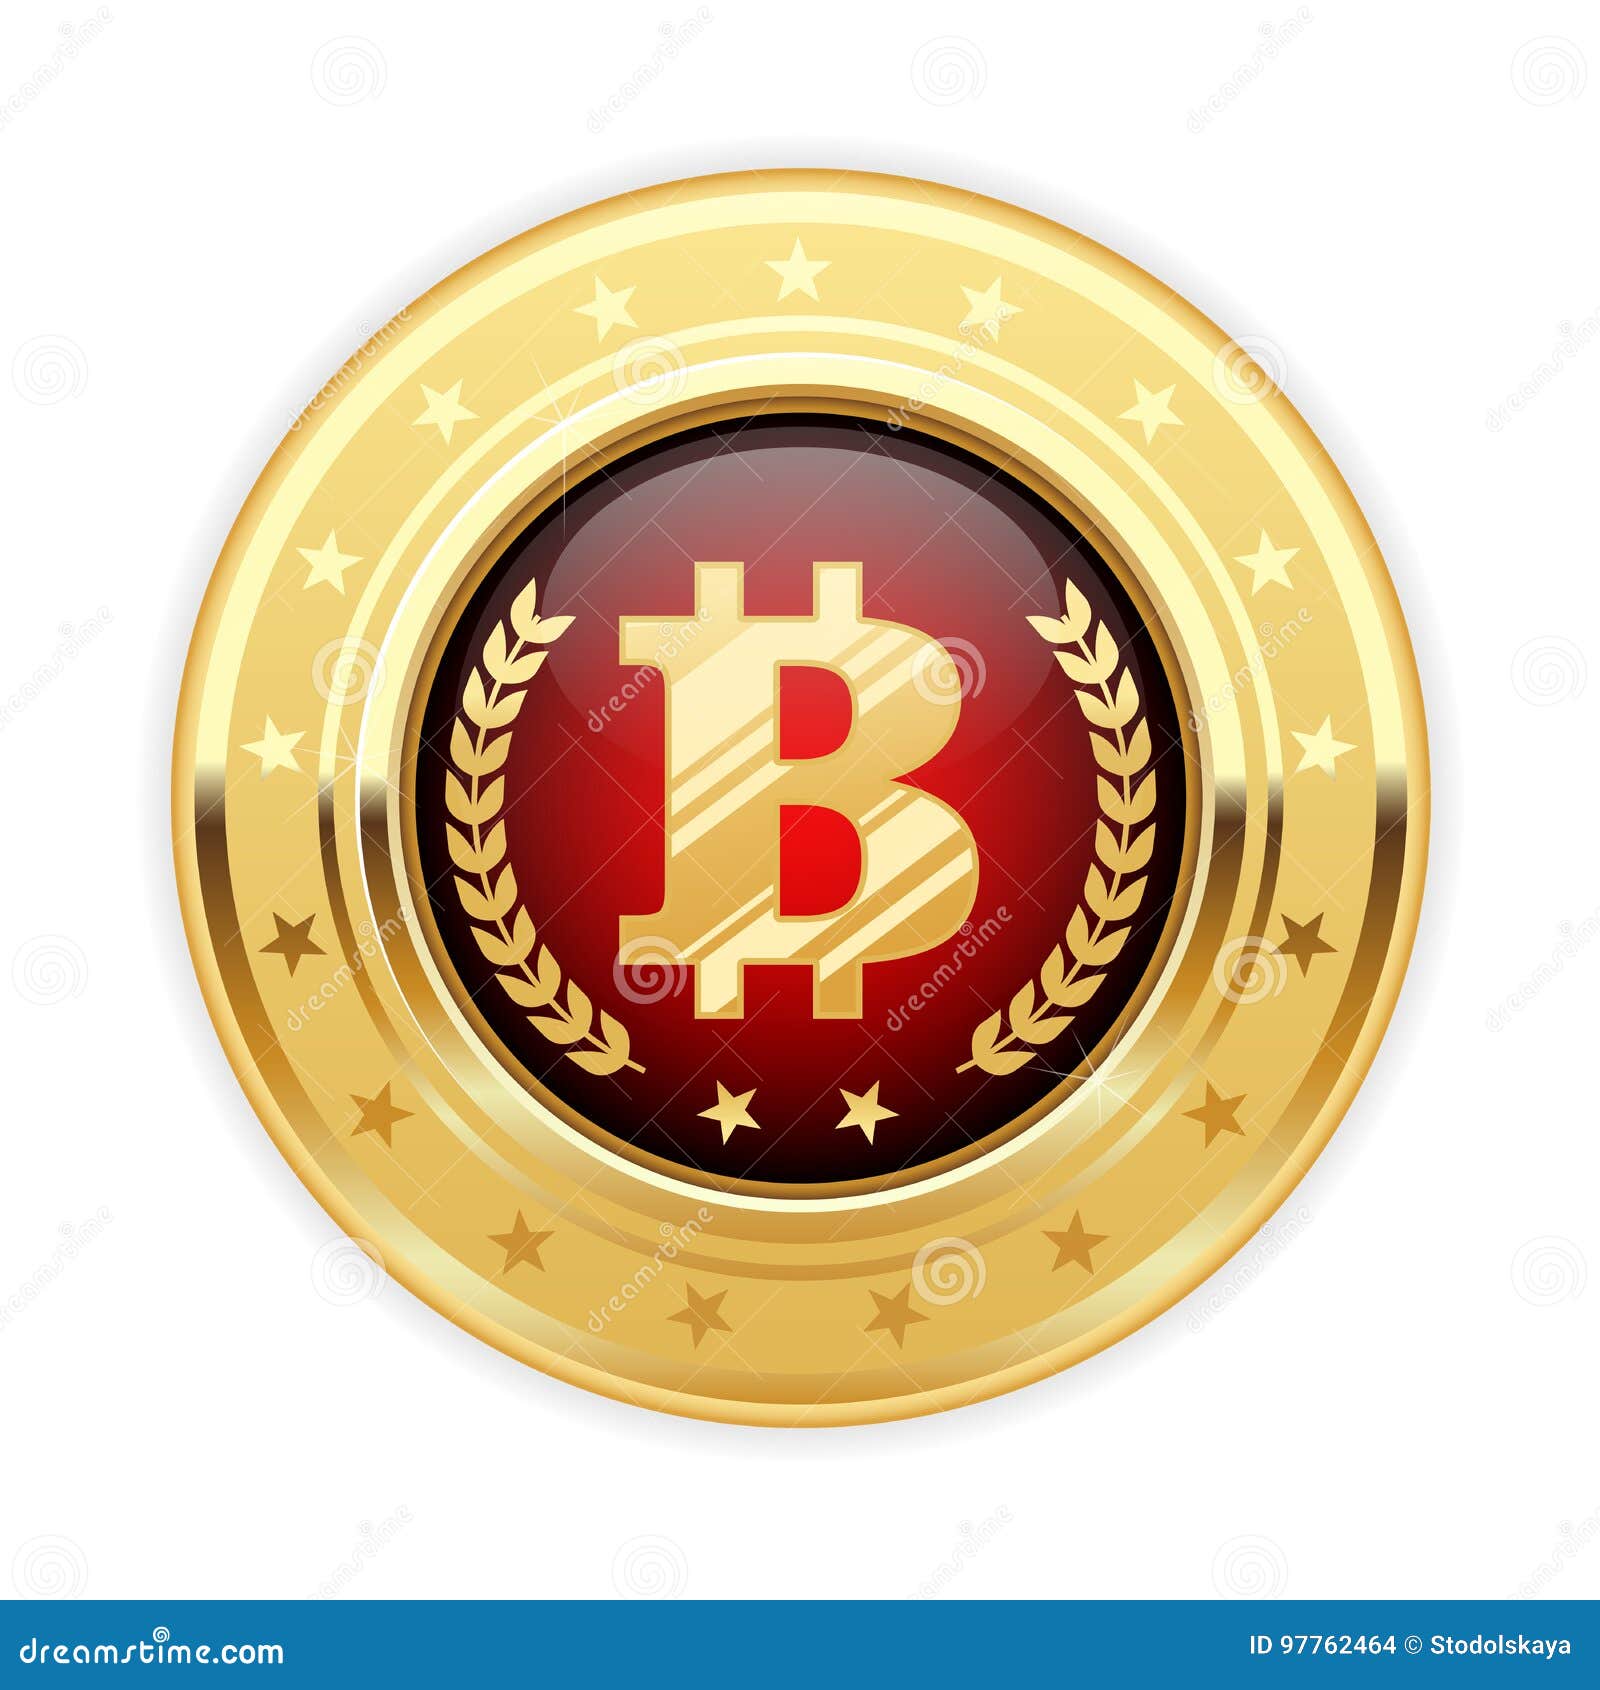 cryptocurrency merch icon